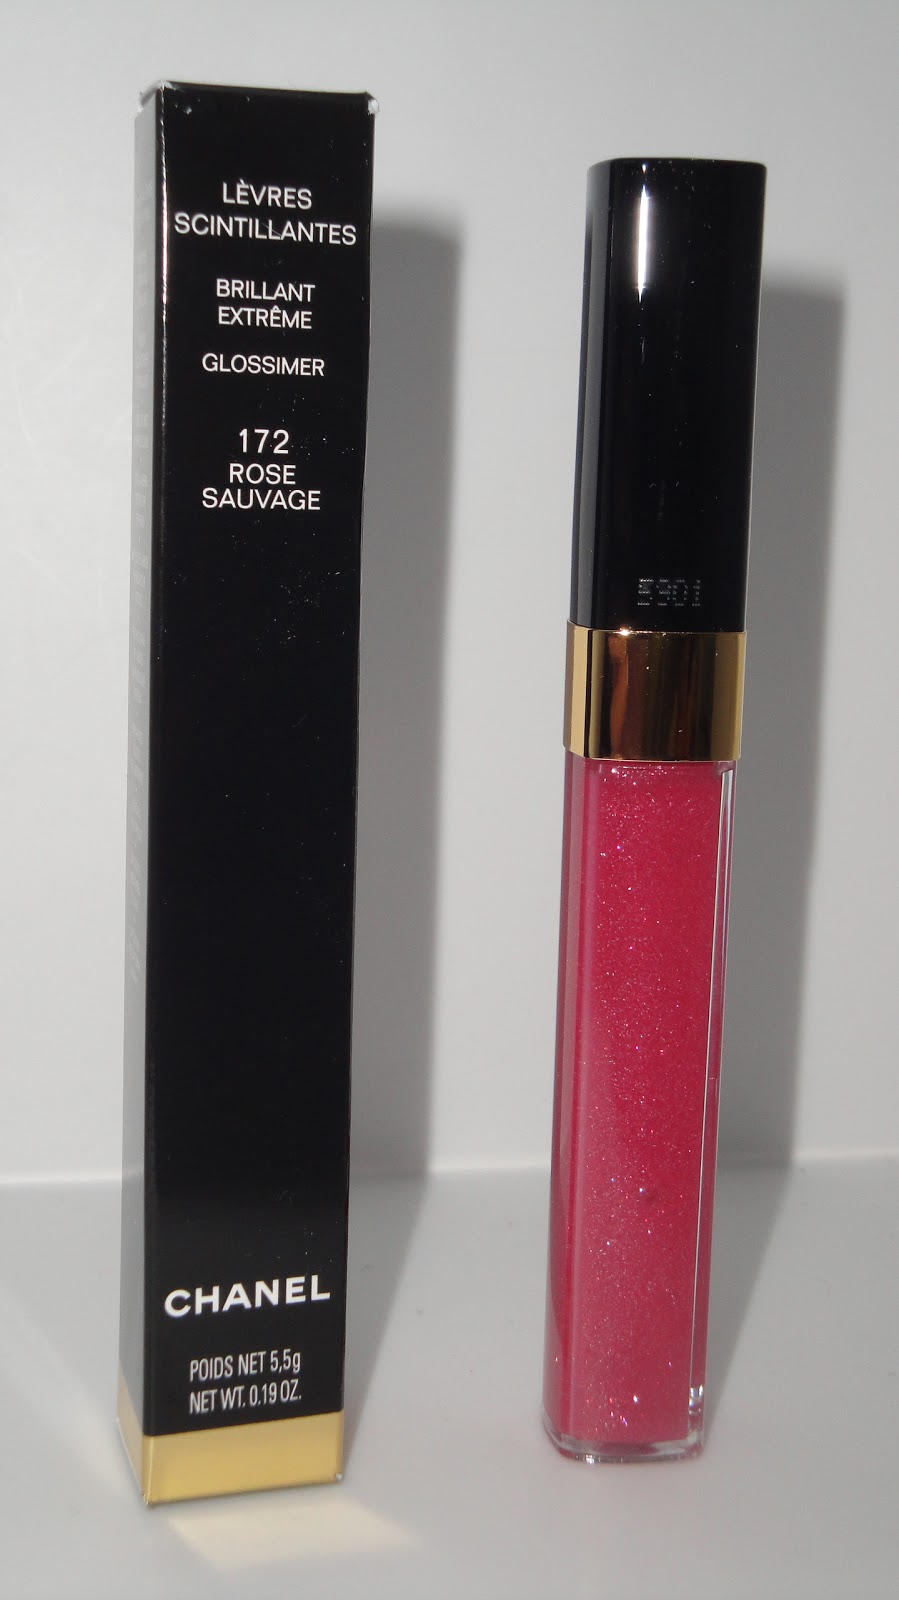 Jayded Dreaming Beauty Blog : 172 ROSE SAUVAGE CHANEL LEVRES